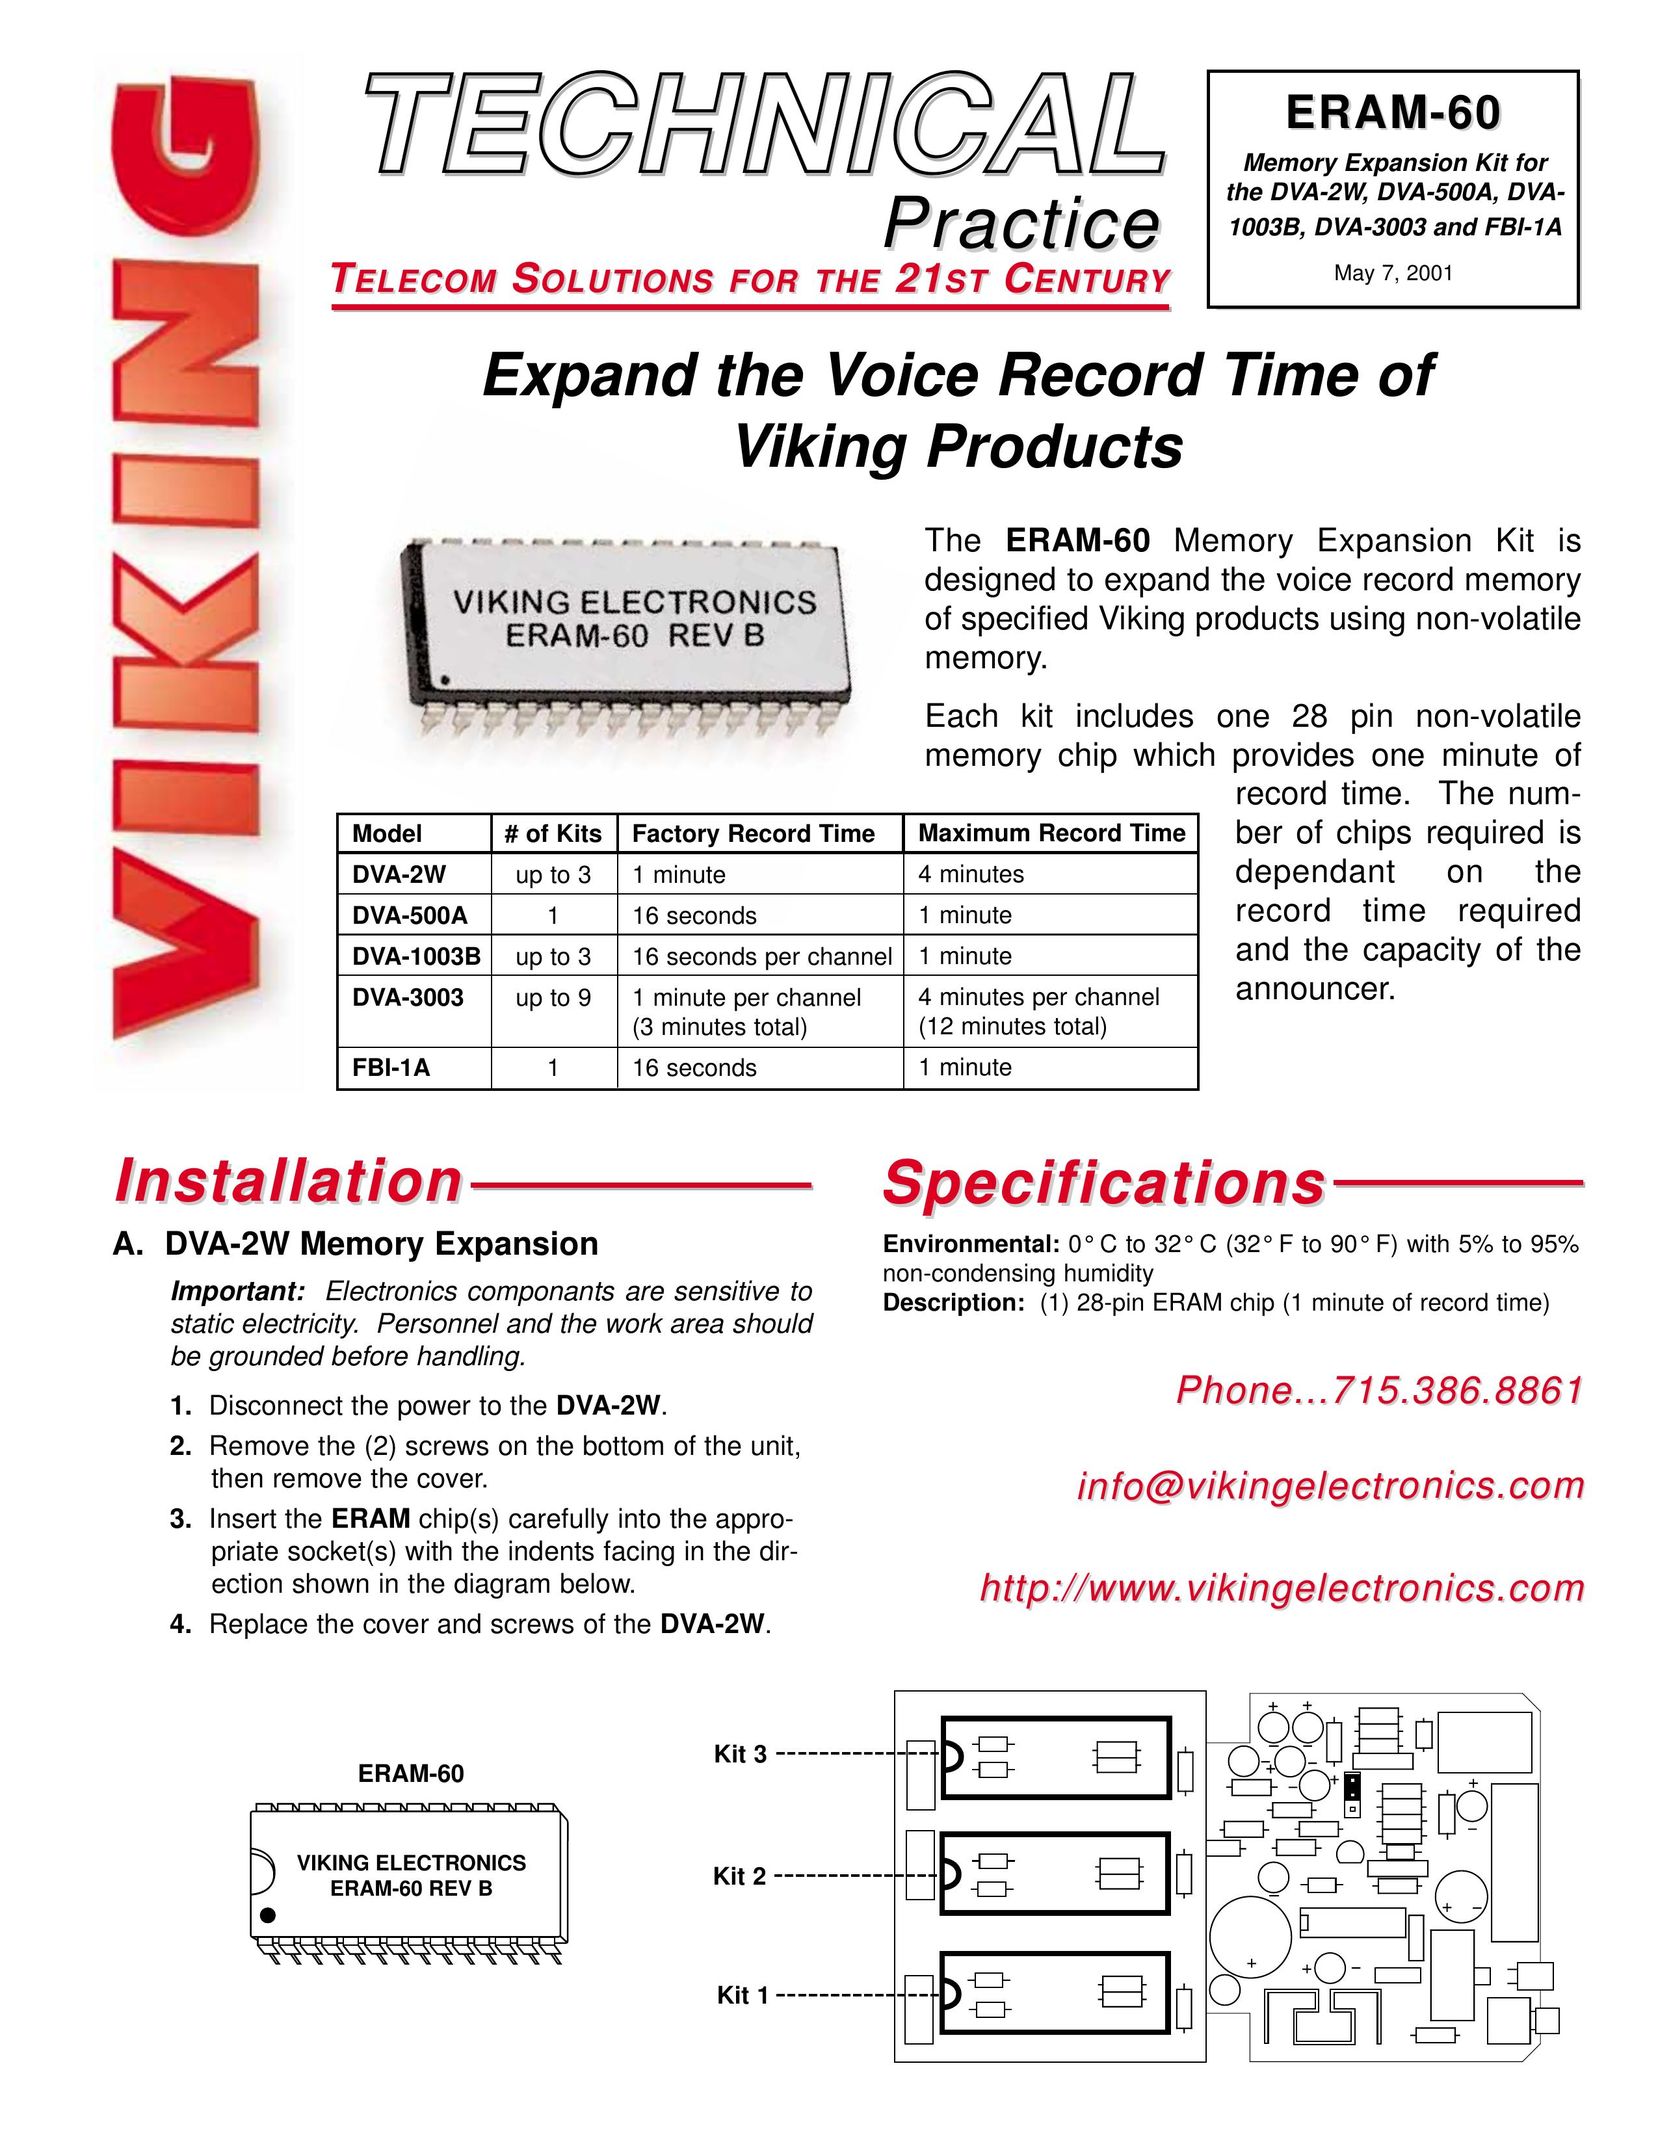 Viking Electronics DVA-500A Video Gaming Accessories User Manual (Page 1)